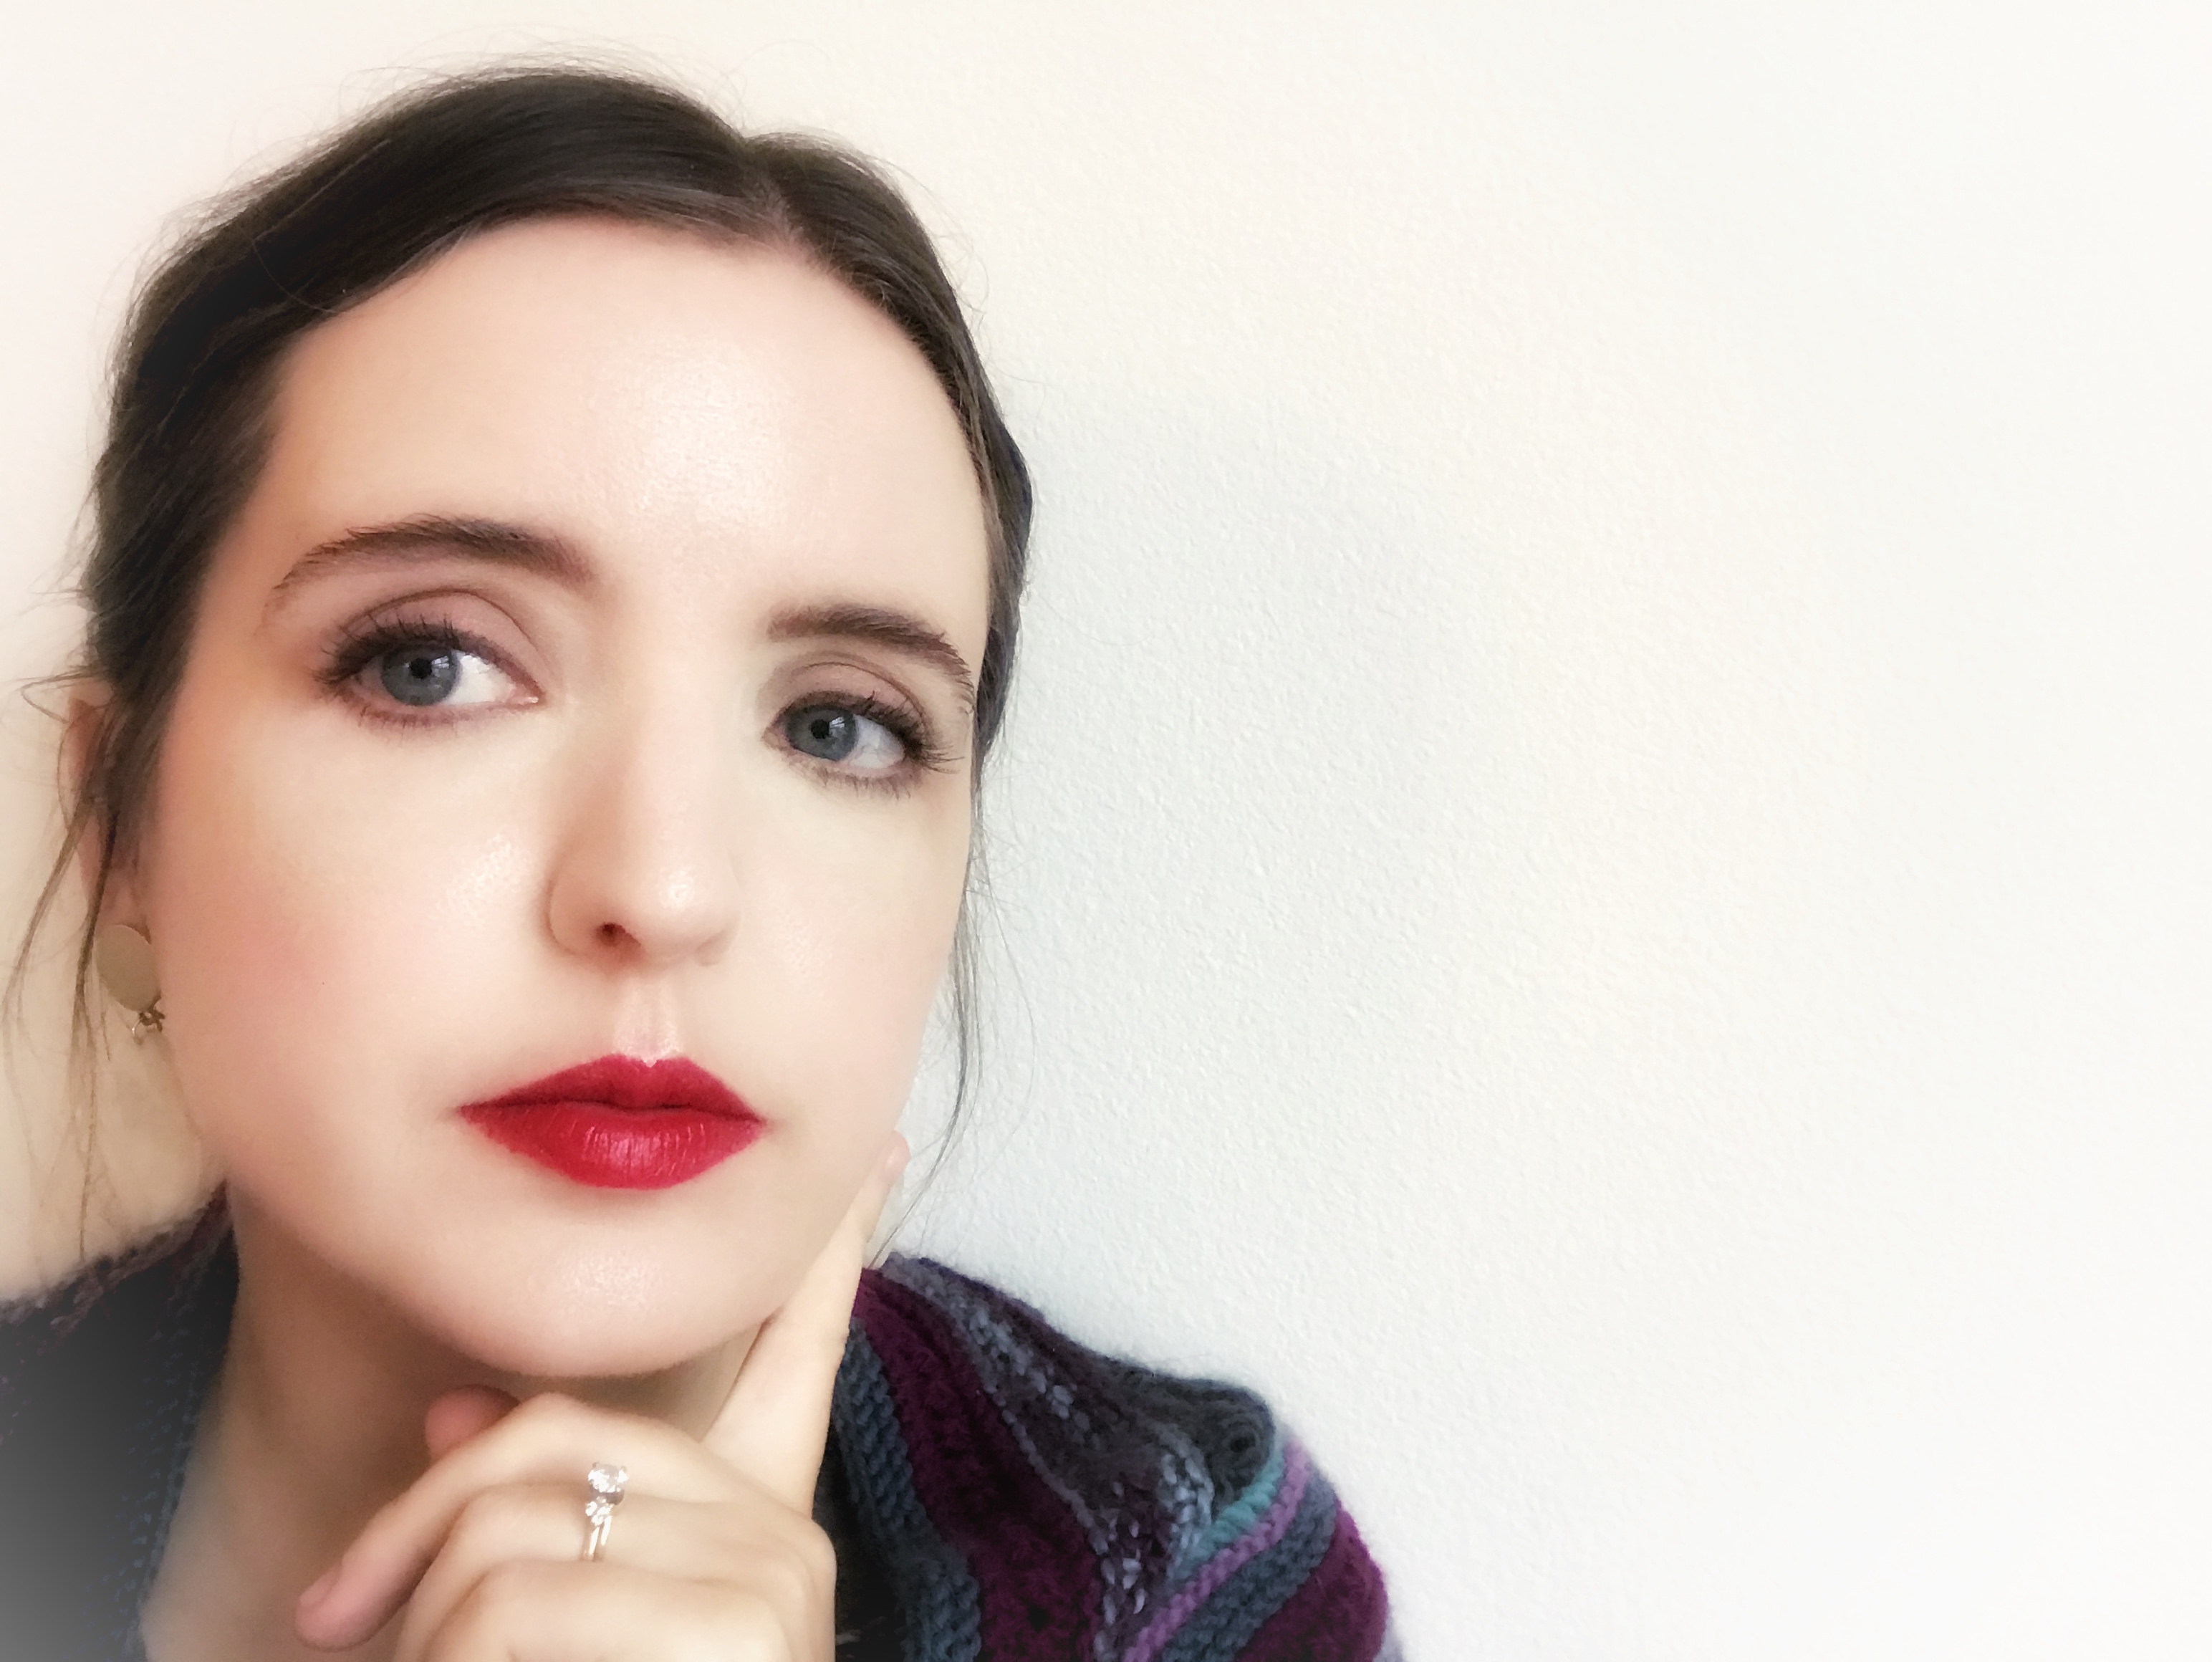 Close up selfie of visual artist, writer, and educator Erin Schalk in front of a white textured wall. Her skin is glowing, her eyes are focused elsewhere, and she has bright red lipstick and black eyeliner on. Her brown hair is up in a loose style and one finger in gently up near her face. 